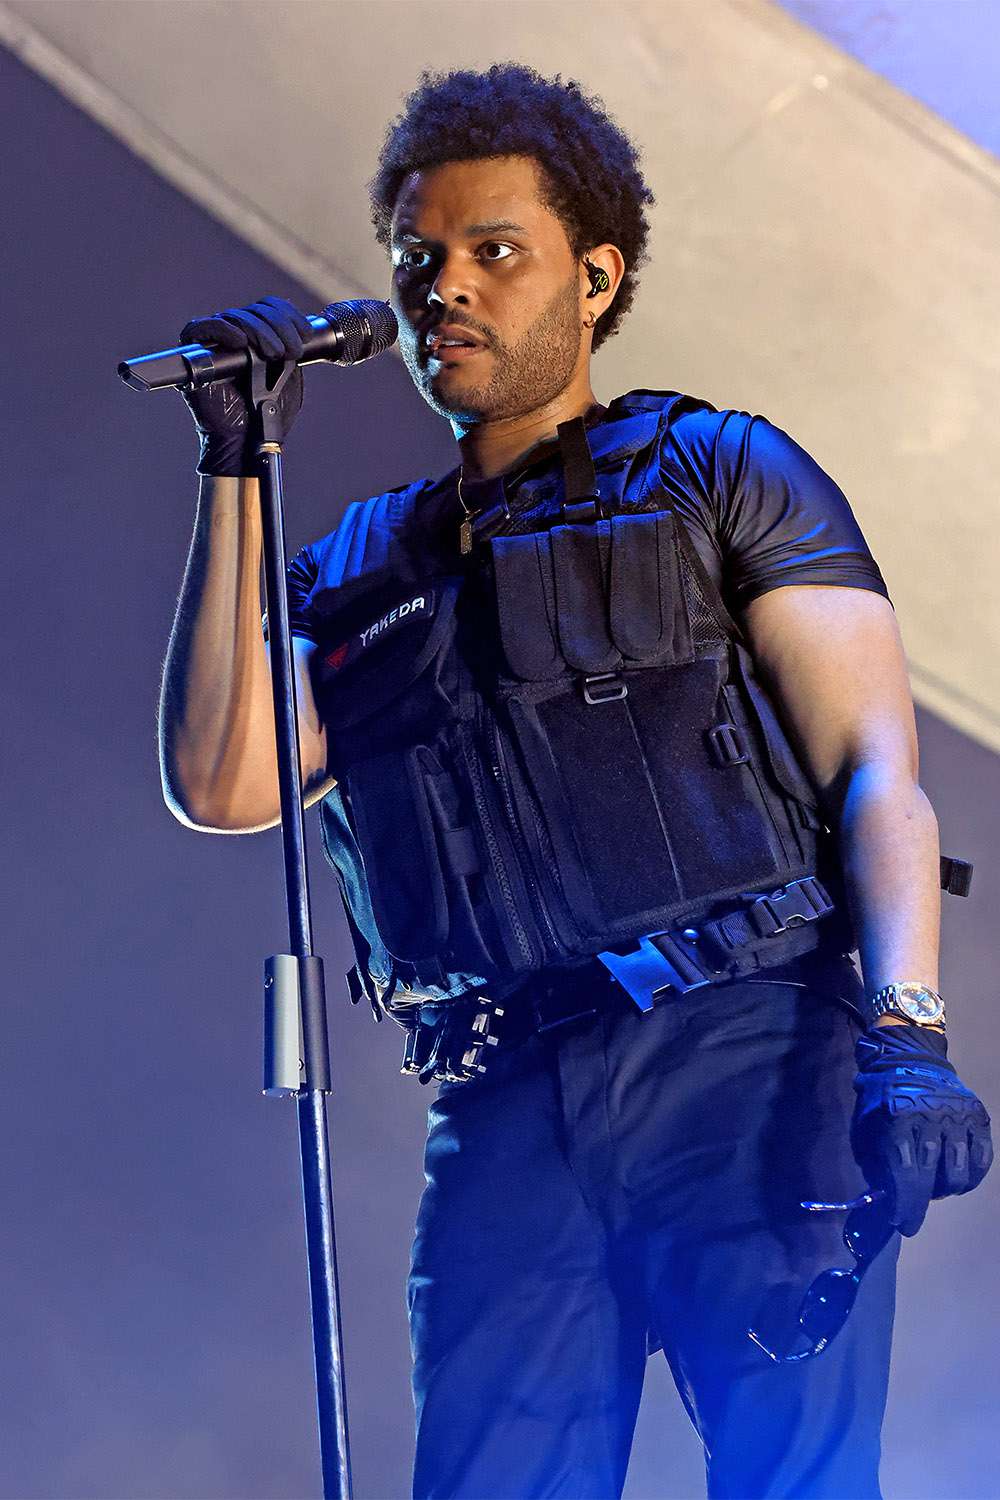 INDIO, CALIFORNIA - APRIL 24: The Weeknd performs on the Coachella stage during the 2022 Coachella Valley Music And Arts Festival on April 24, 2022 in Indio, California. (Photo by Amy Sussman/Getty Images for Coachella)